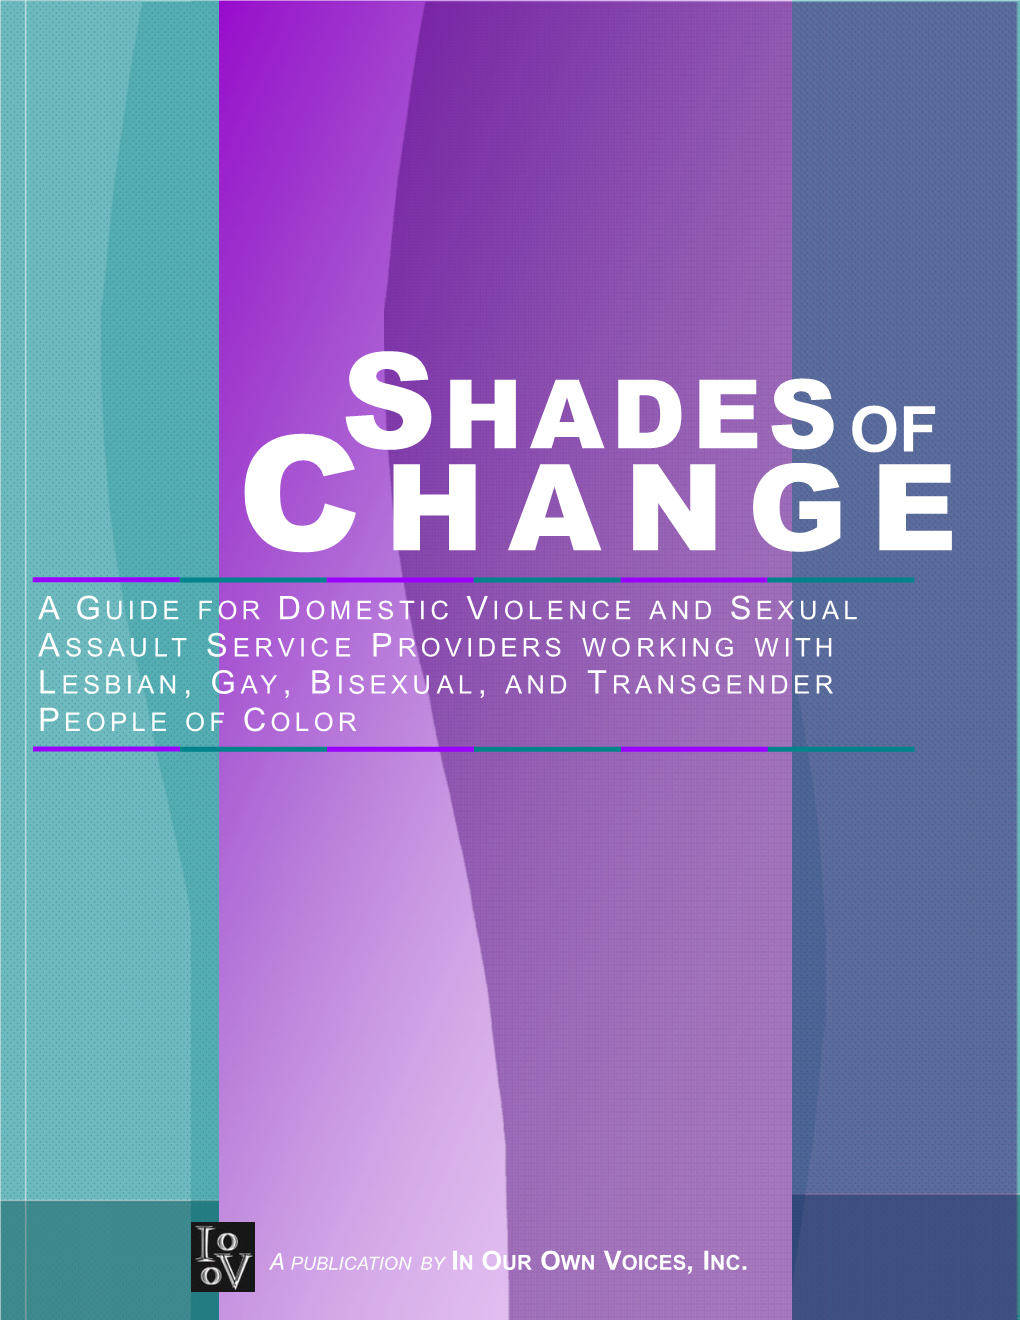 Shades of Change: a Guide for Domestic Violence and Sexual